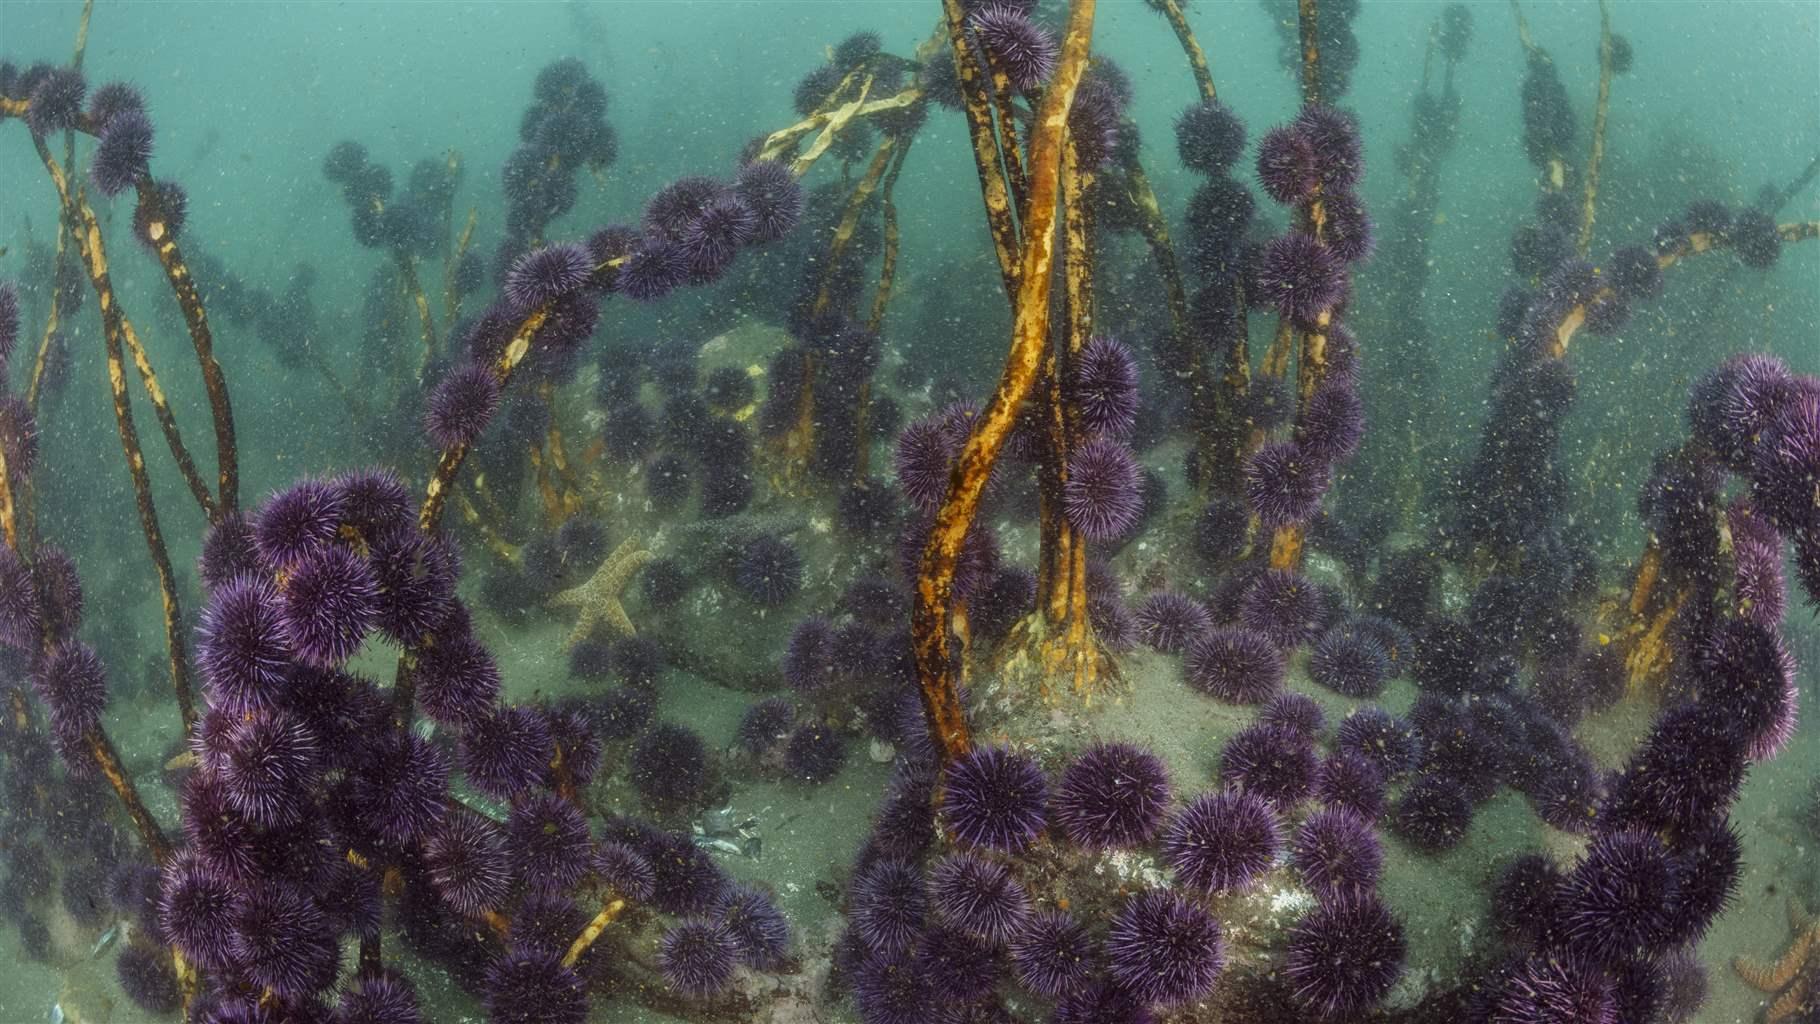 An underwater view shows hundreds of purple urchins clinging to brown stalks of vegetation that grow from the seafloor. 